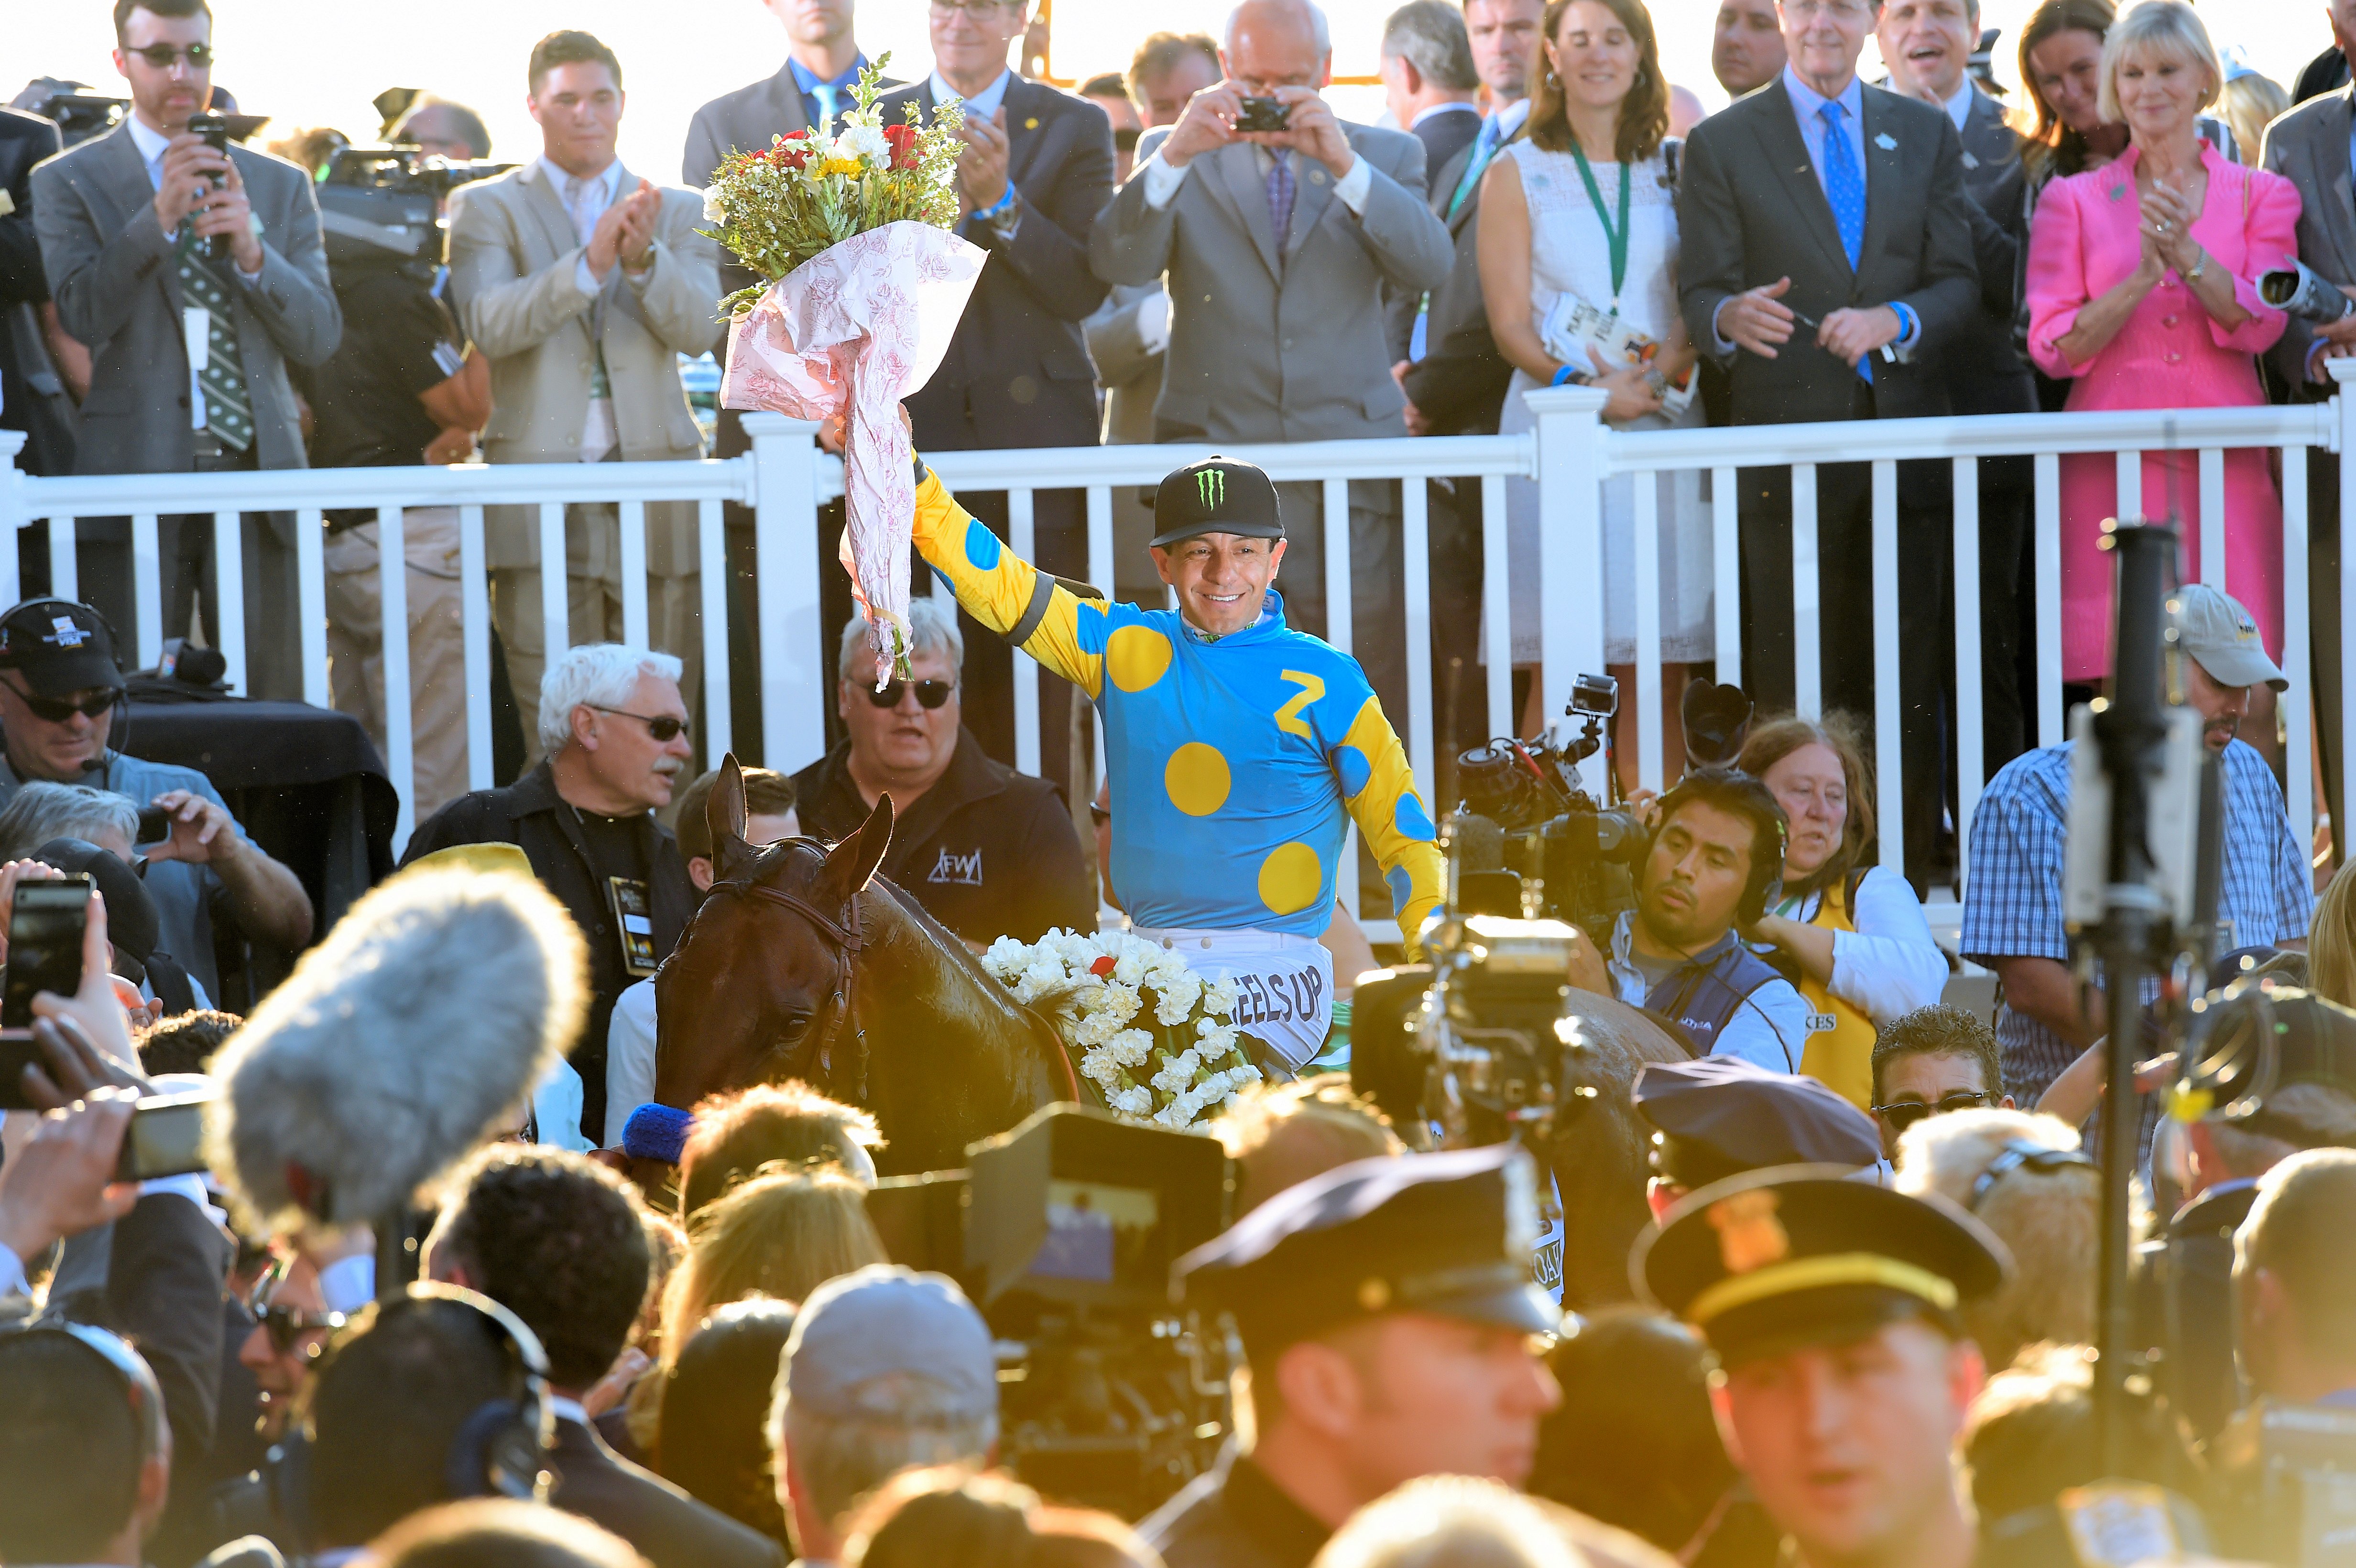 Victor Espinoza after winning the 2015 Belmont Stakes with American Pharoah (NYRA)